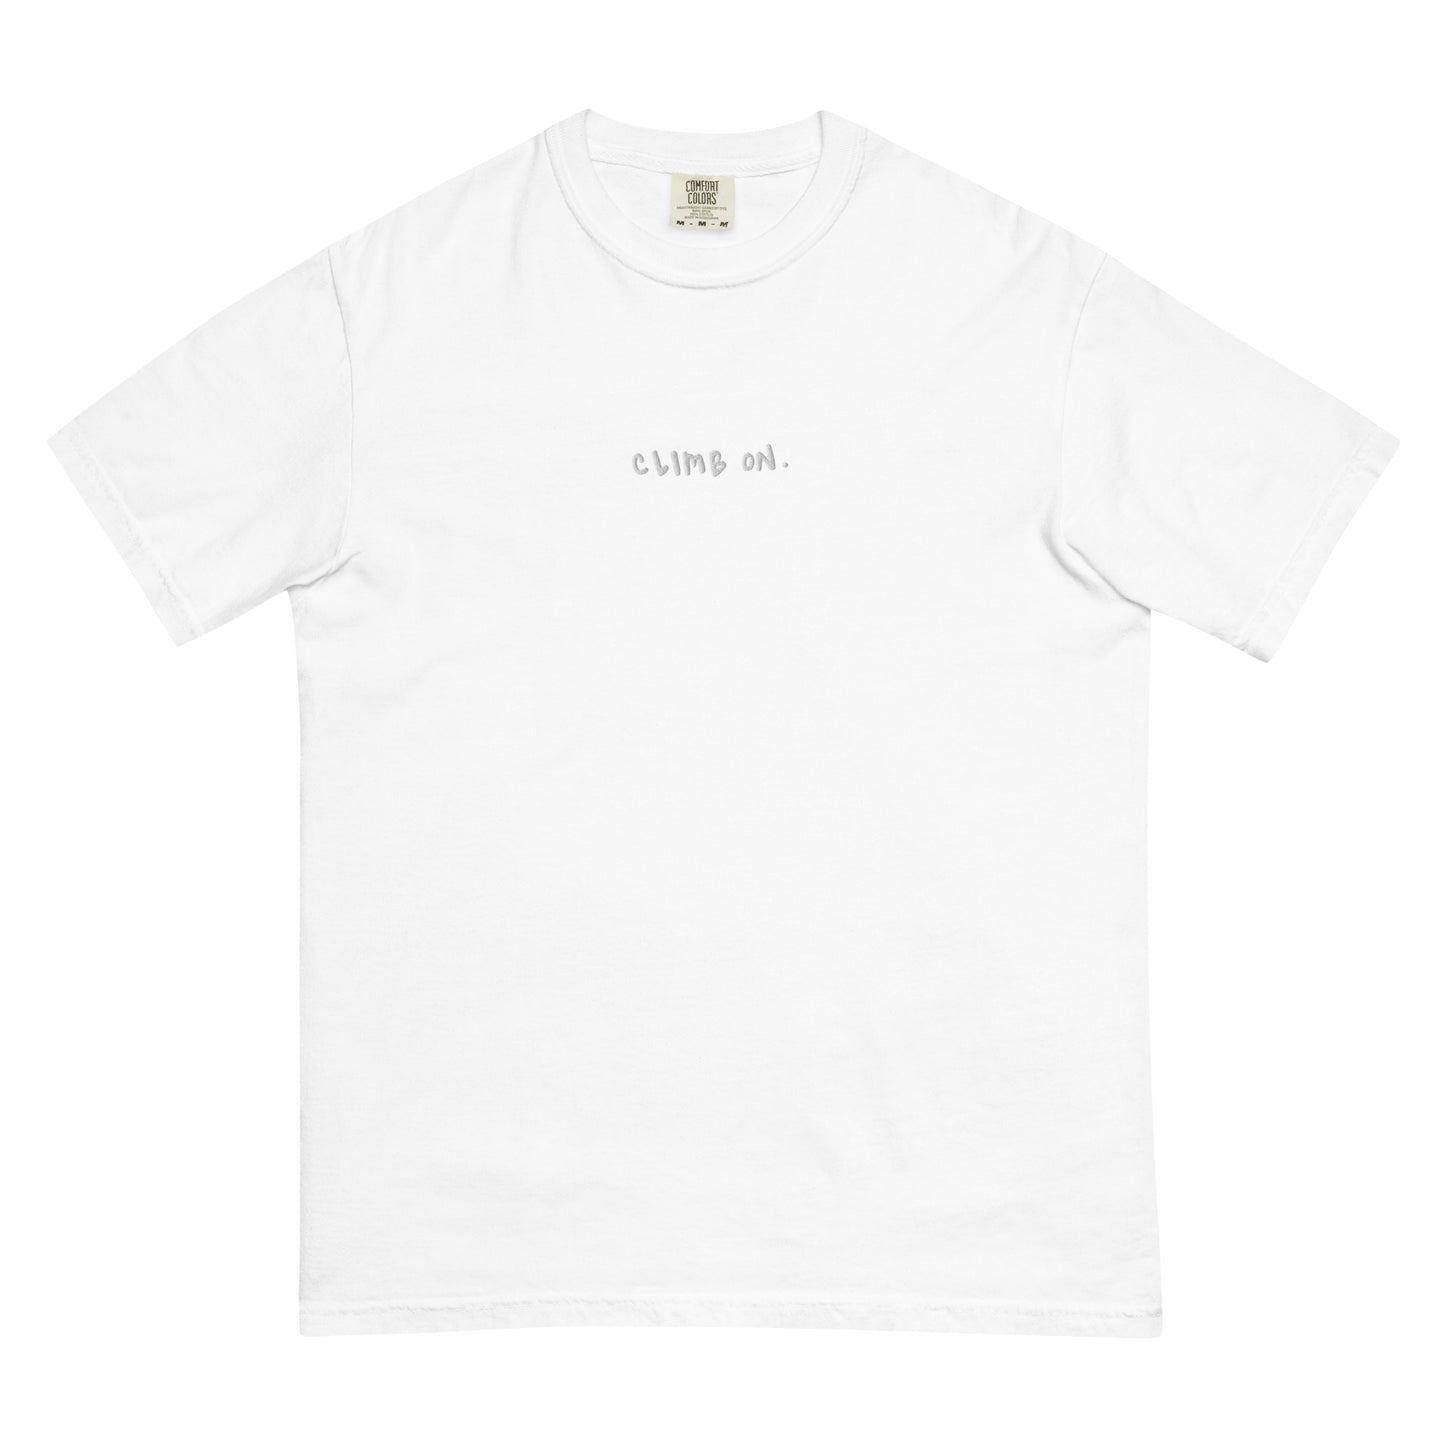 climb on embroidered garment-dyed heavyweight t-shirt